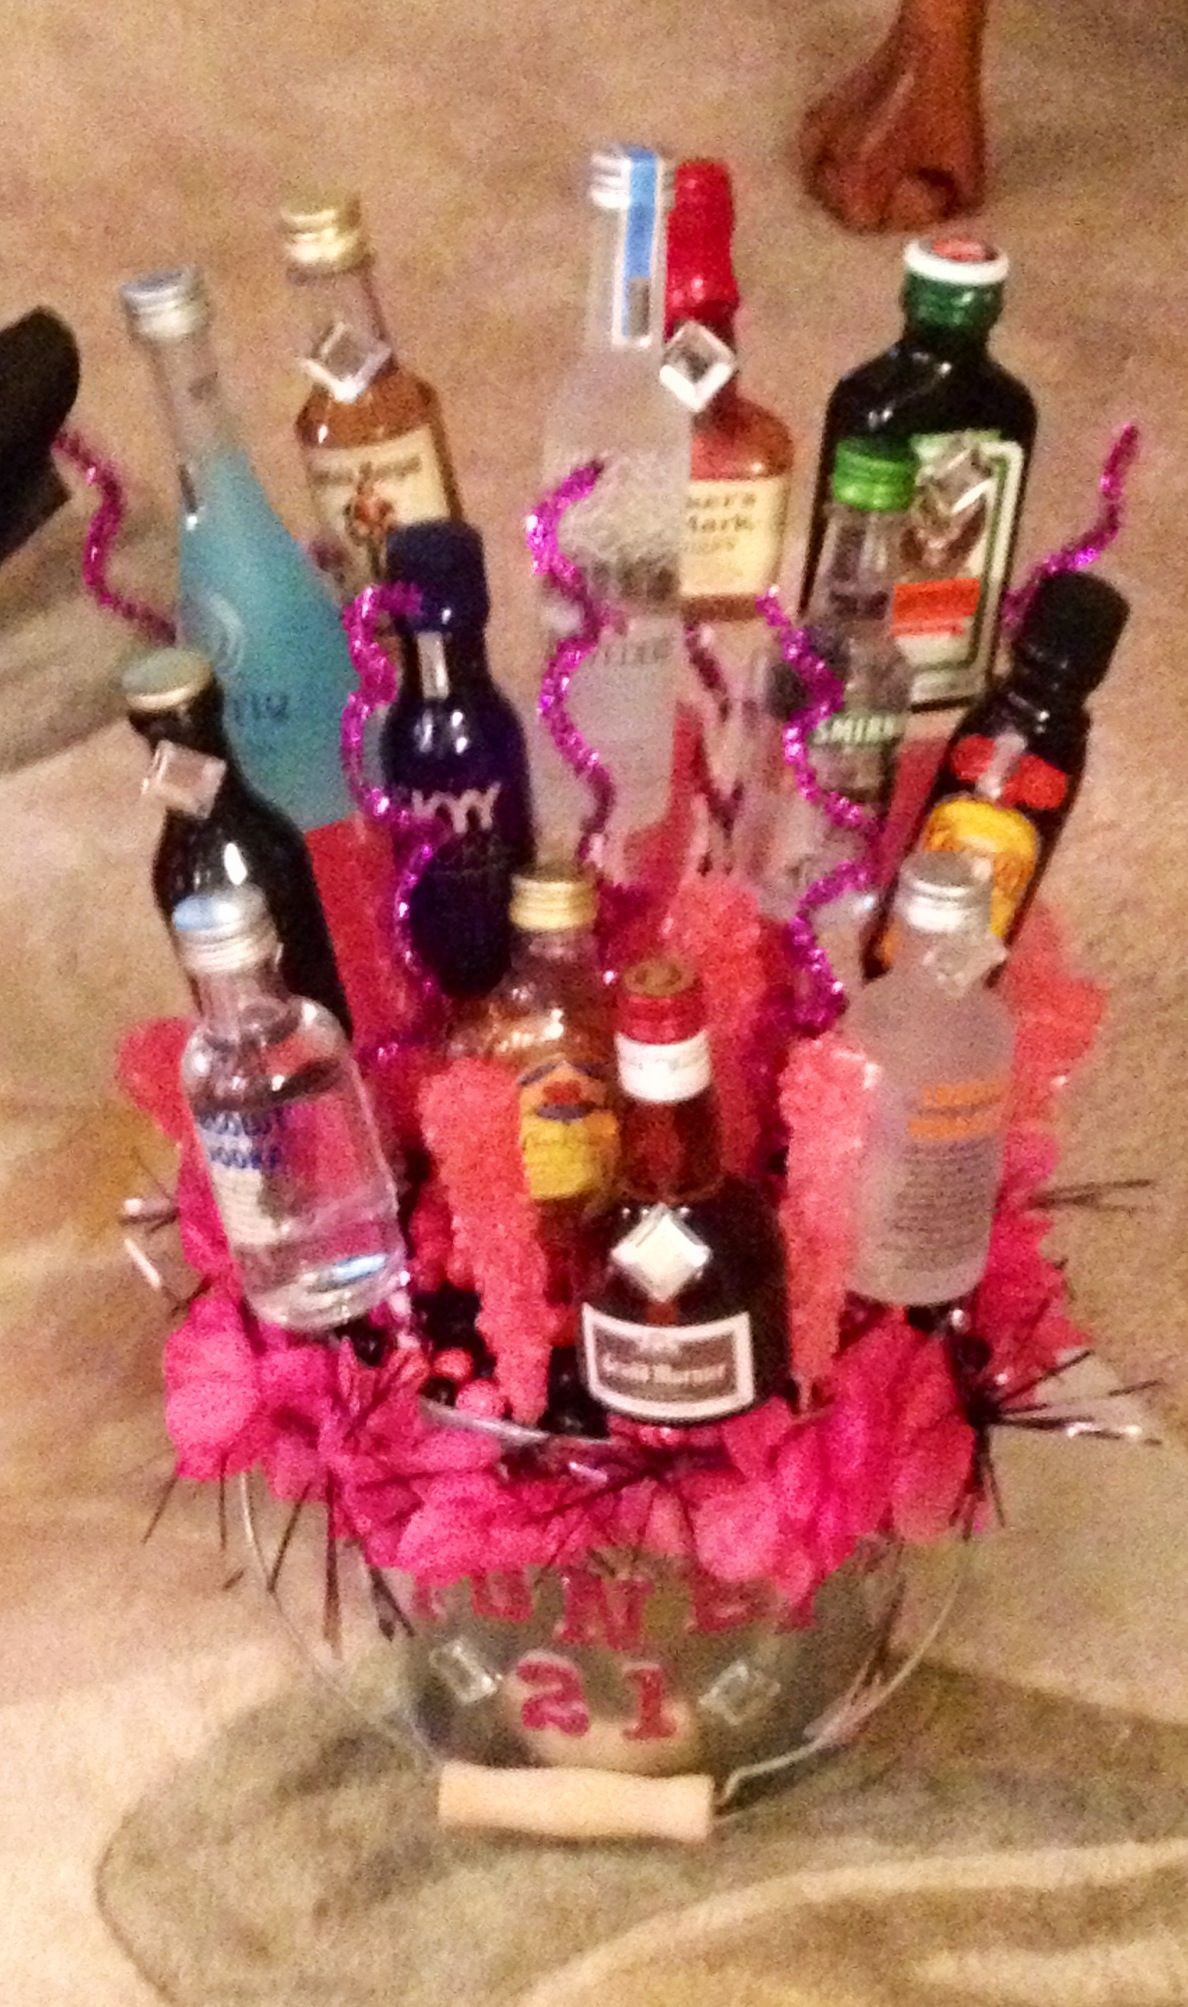 21st Birthday Gift Baskets For Her
 Made an edible alcohol basket for my dear friend for her